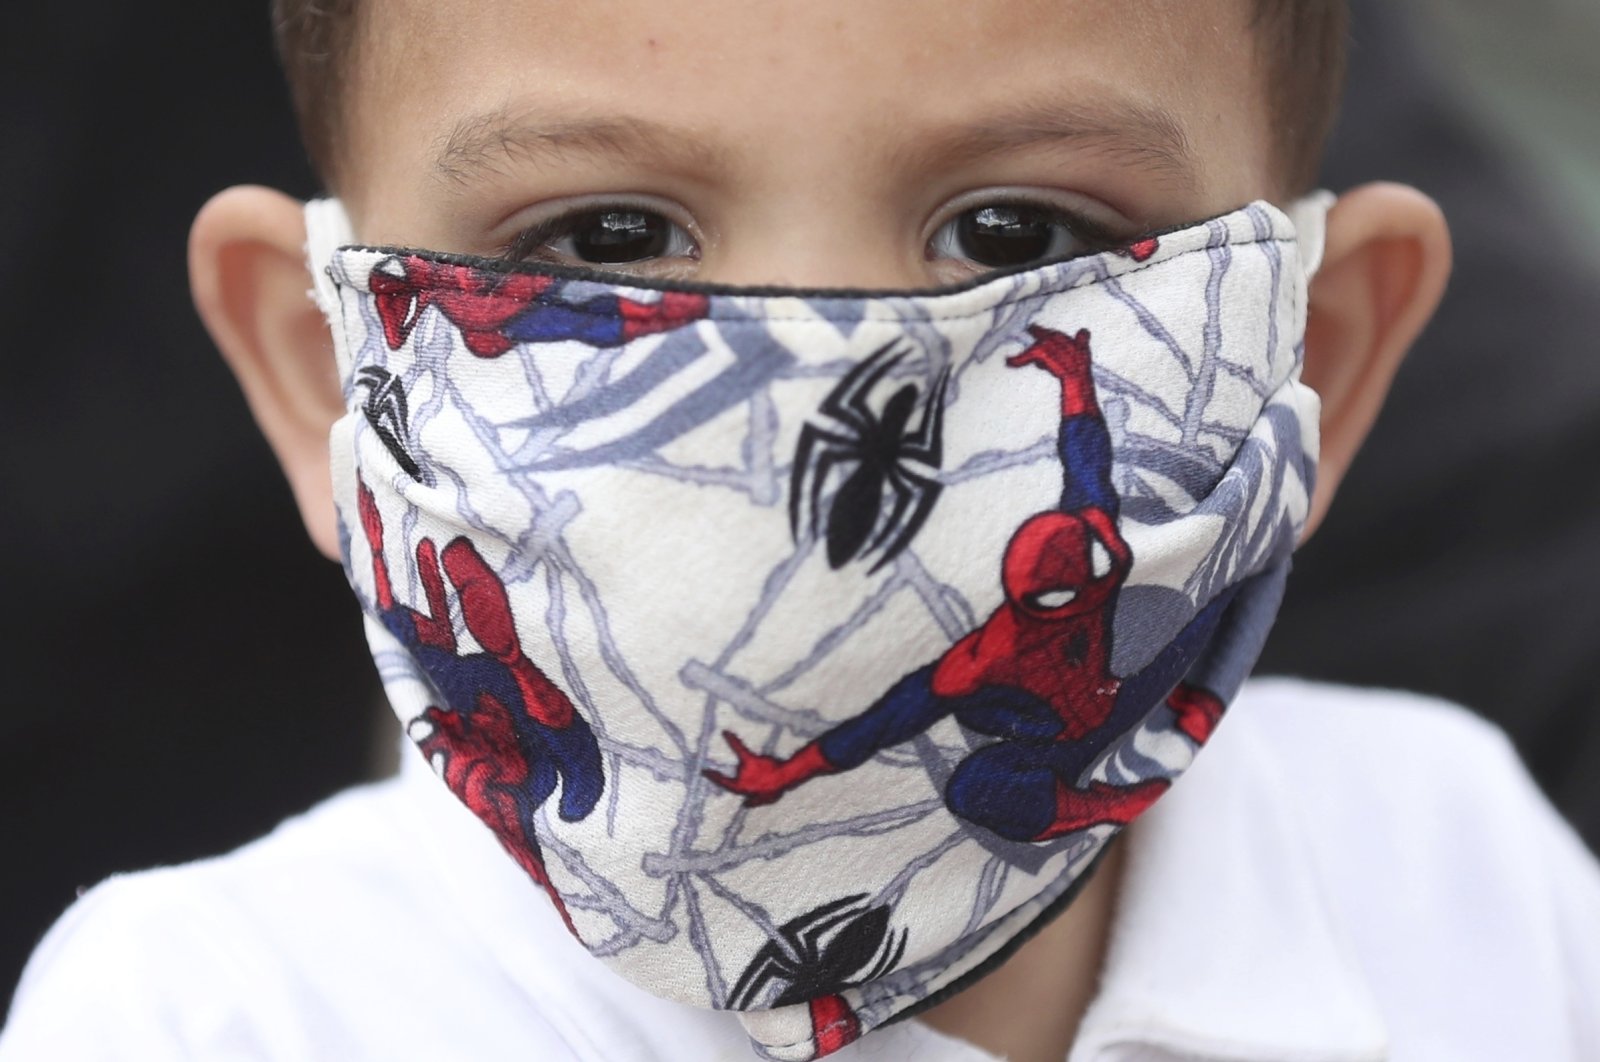 A boy wears a Spider-man face mask amid the spread of the coronavirus in Bogota, Colombia, April 30, 2020. (AP Photo)